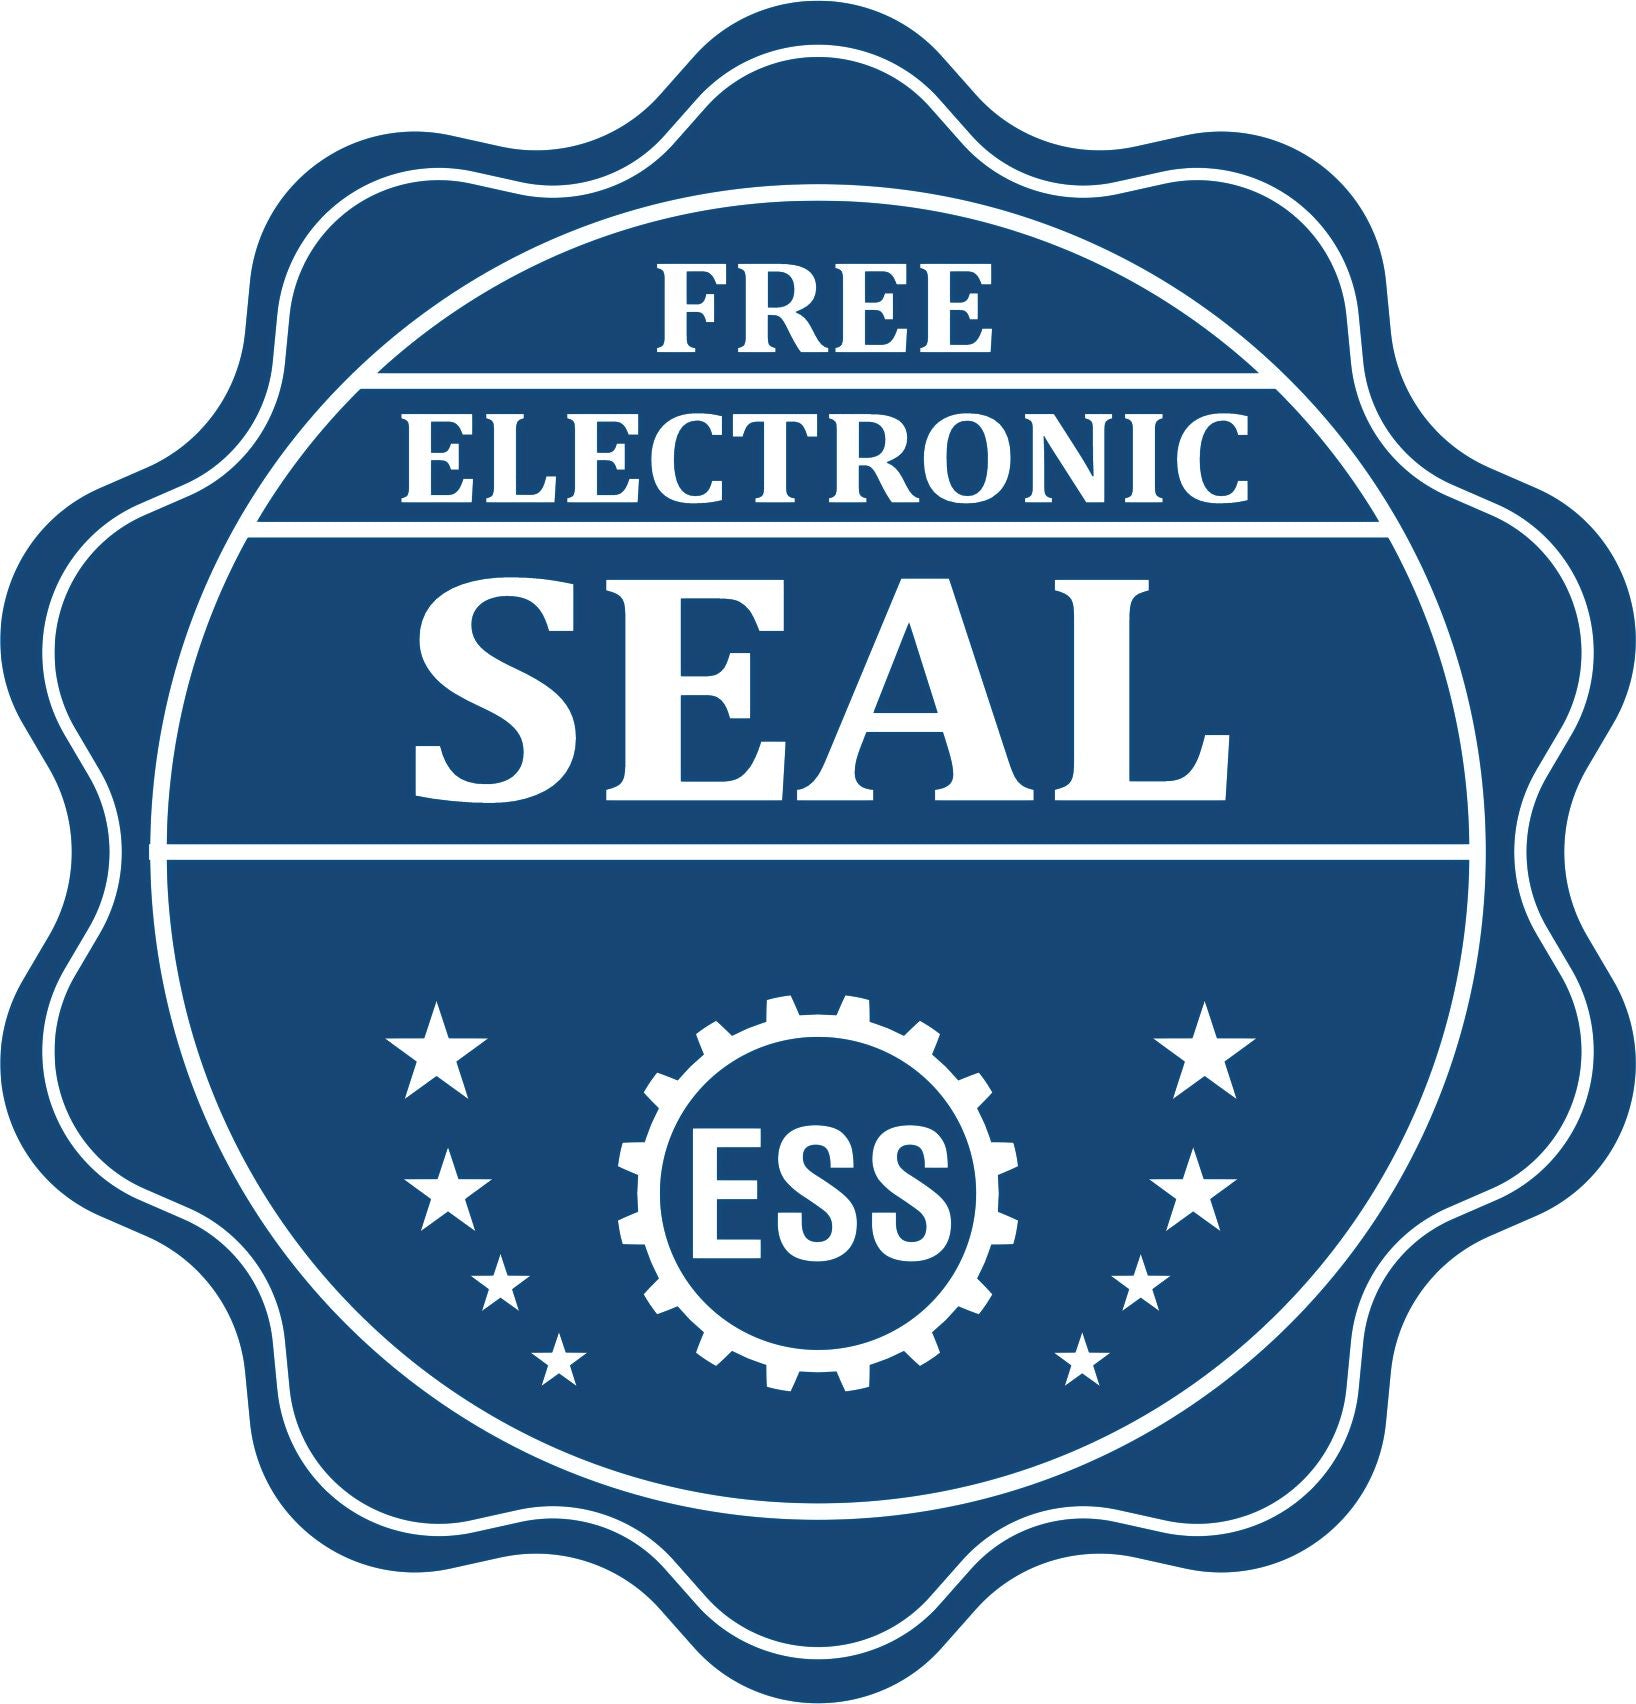 A badge showing a free electronic seal for the Pennsylvania Professional Engineer Seal Stamp with stars and the ESS gear on the emblem.